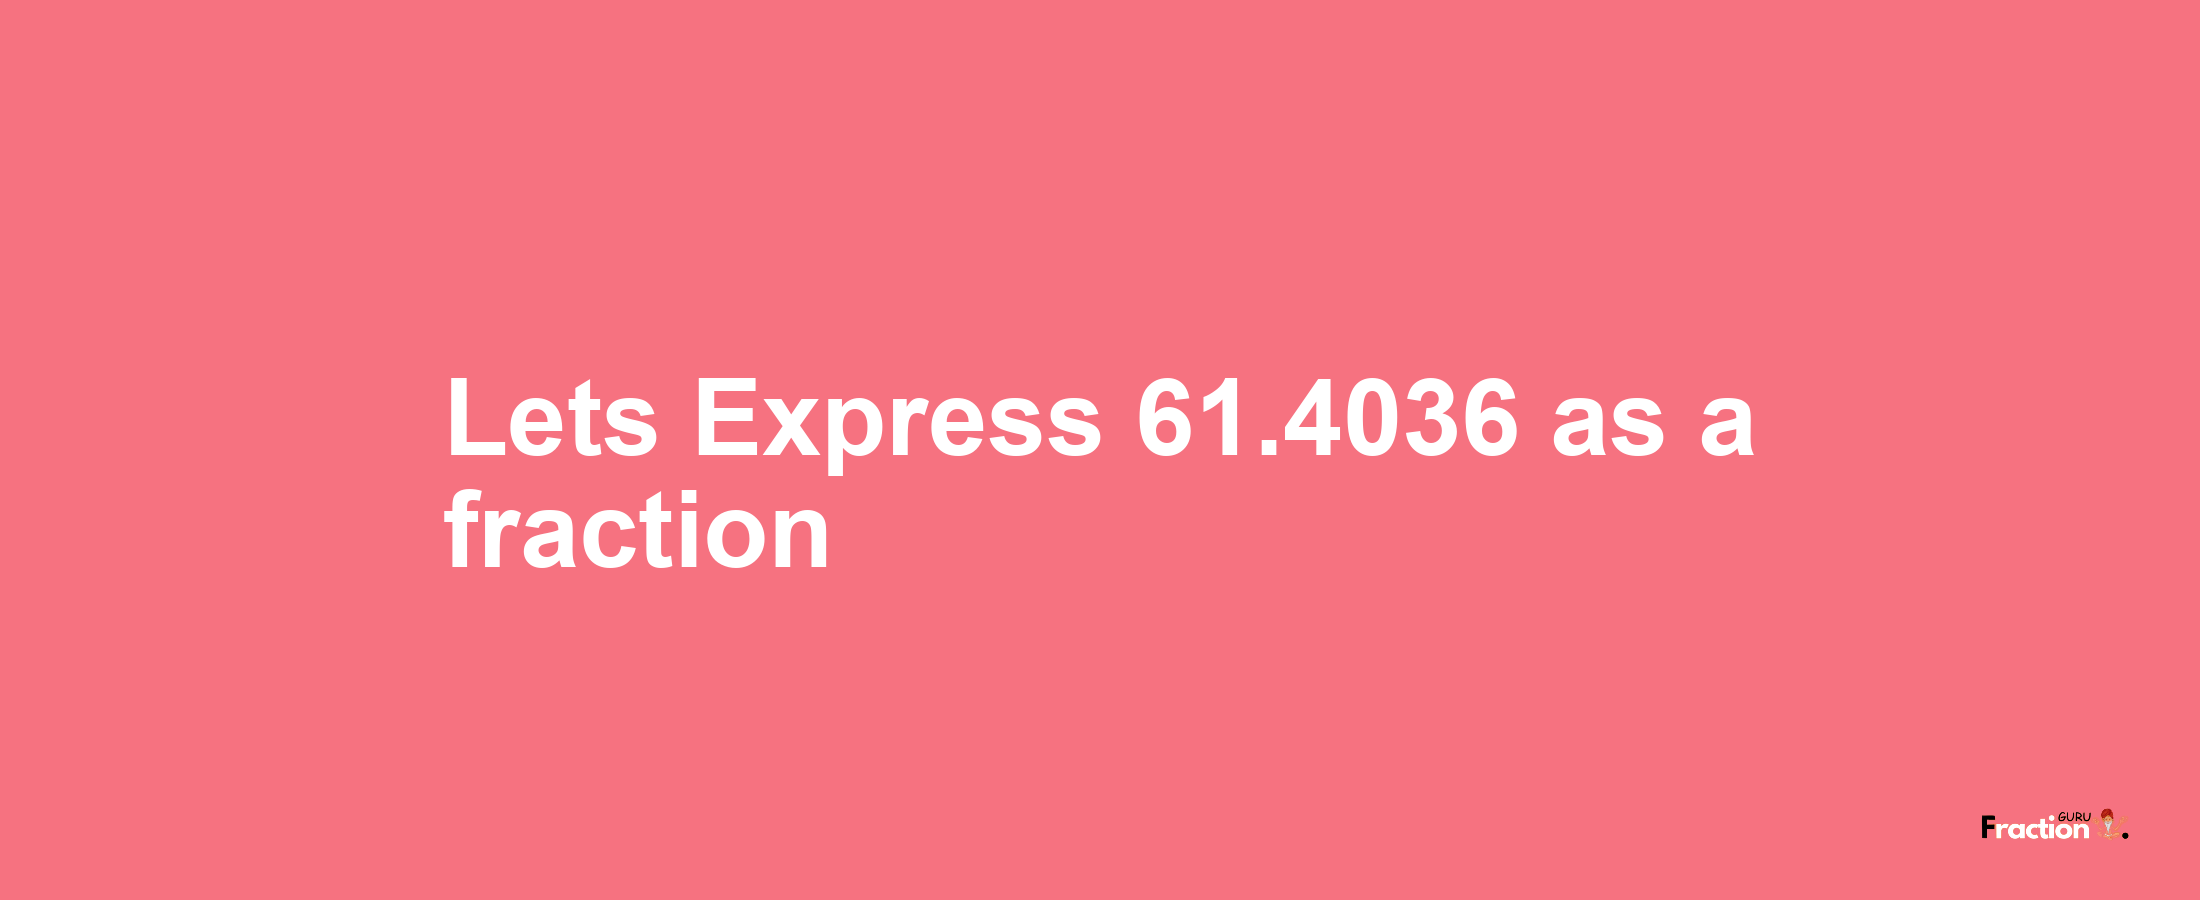 Lets Express 61.4036 as afraction